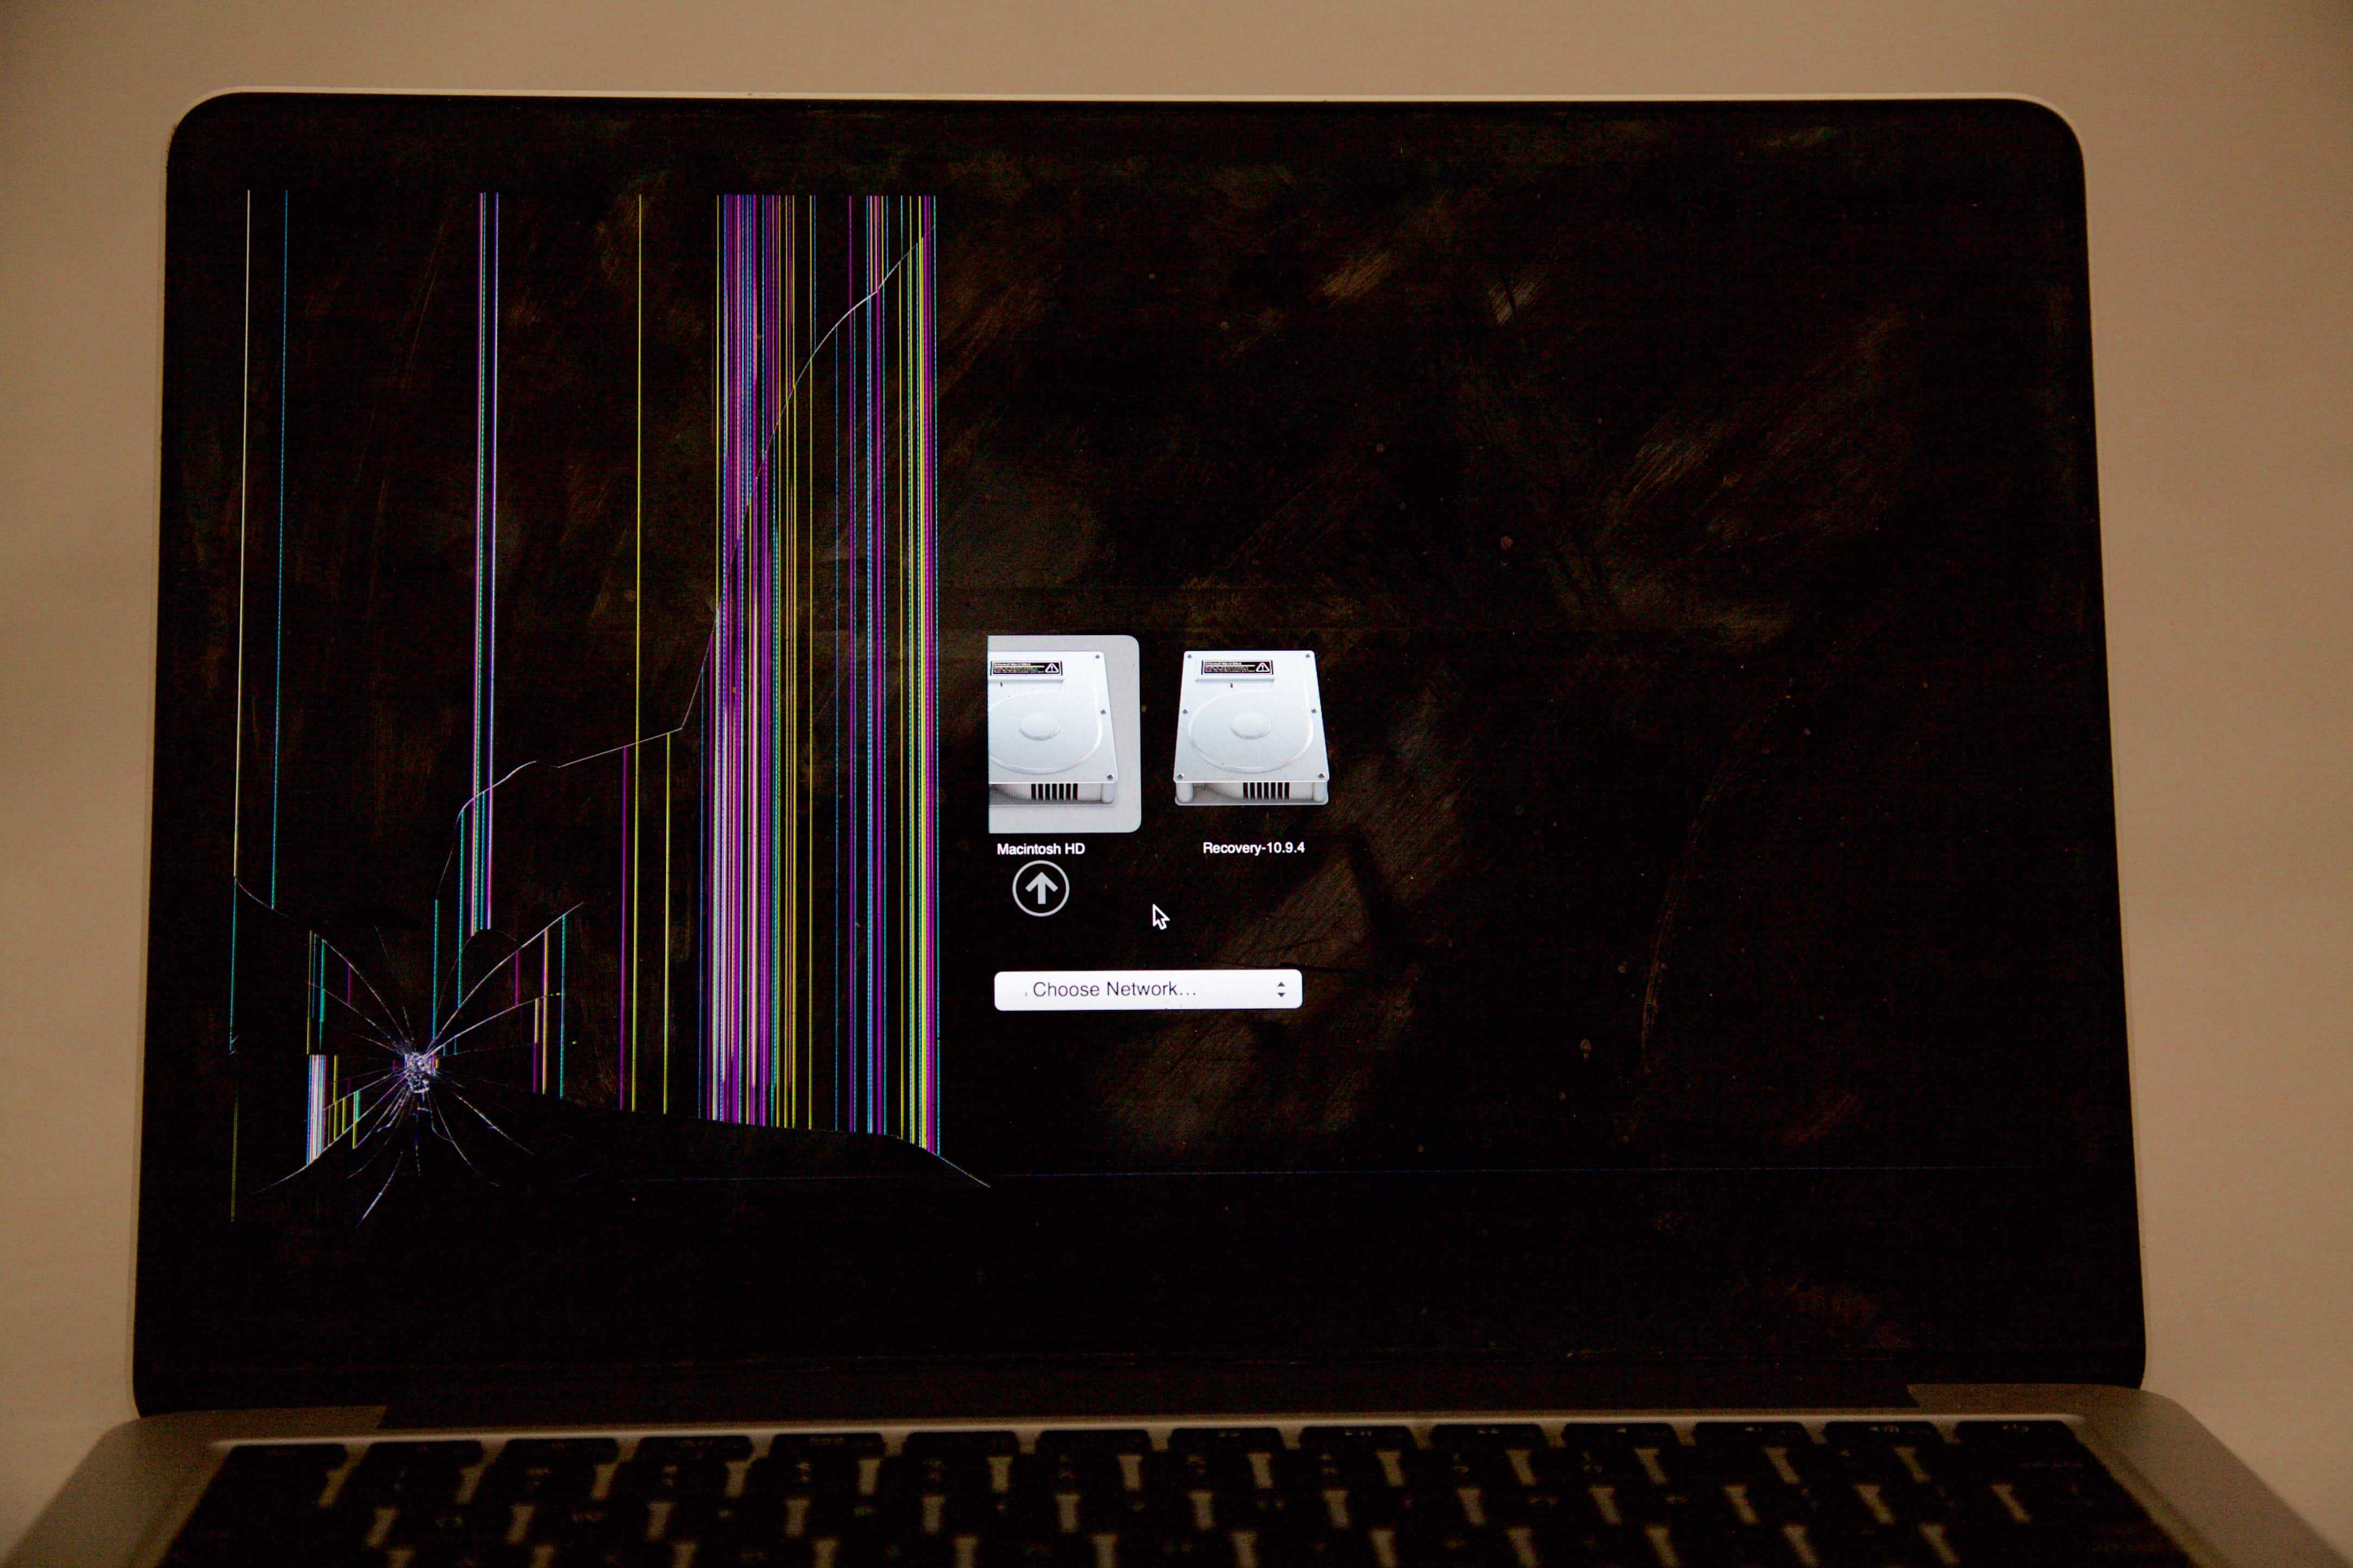 13" Retina MacBook Pro with hit to the display resulting in cracked glass as well as cracked LCD